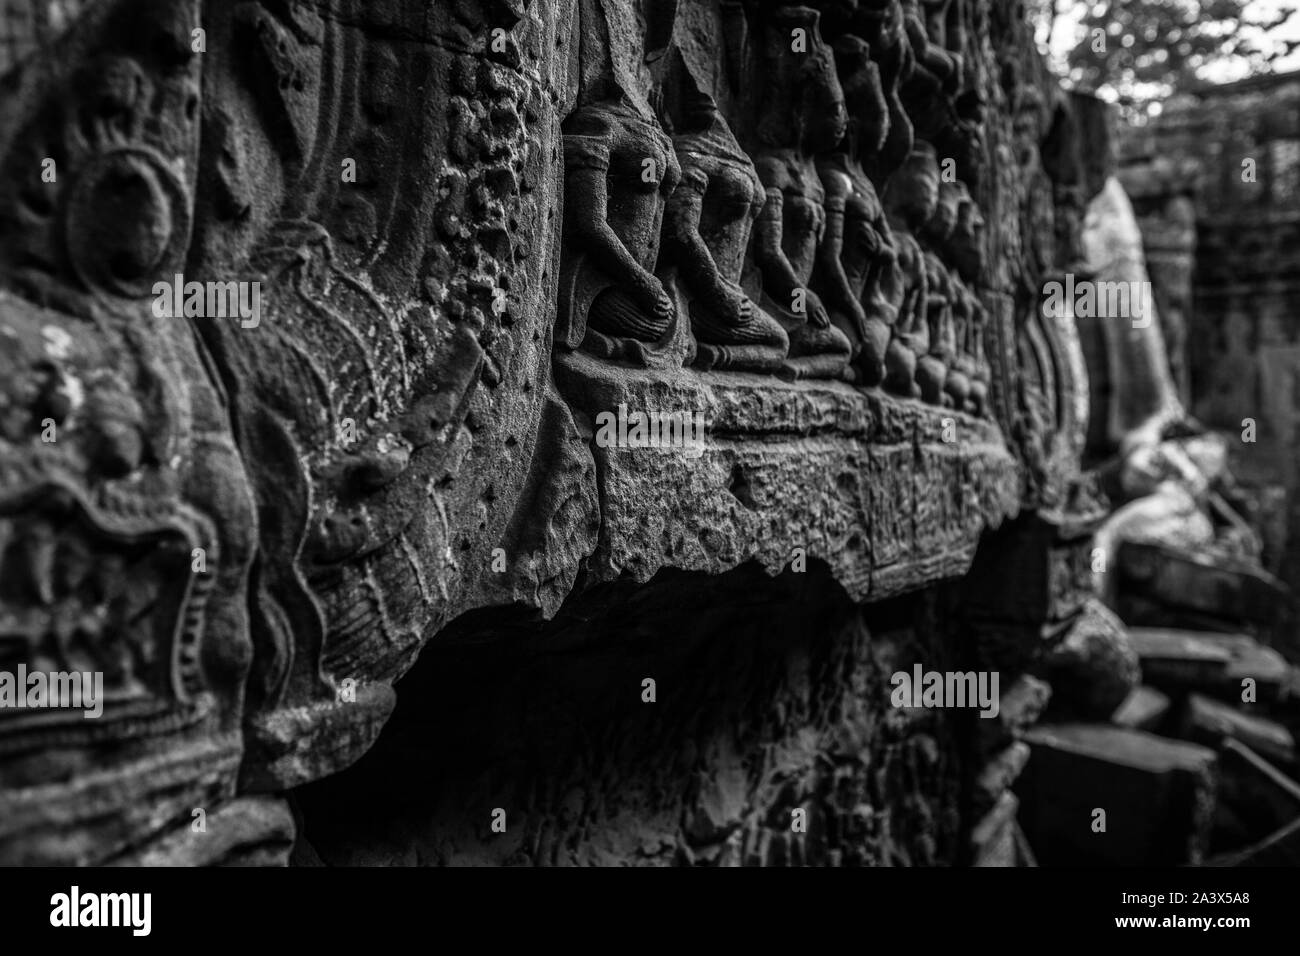 Details of bas reliefs in Angkor Wat, Cambodia Stock Photo